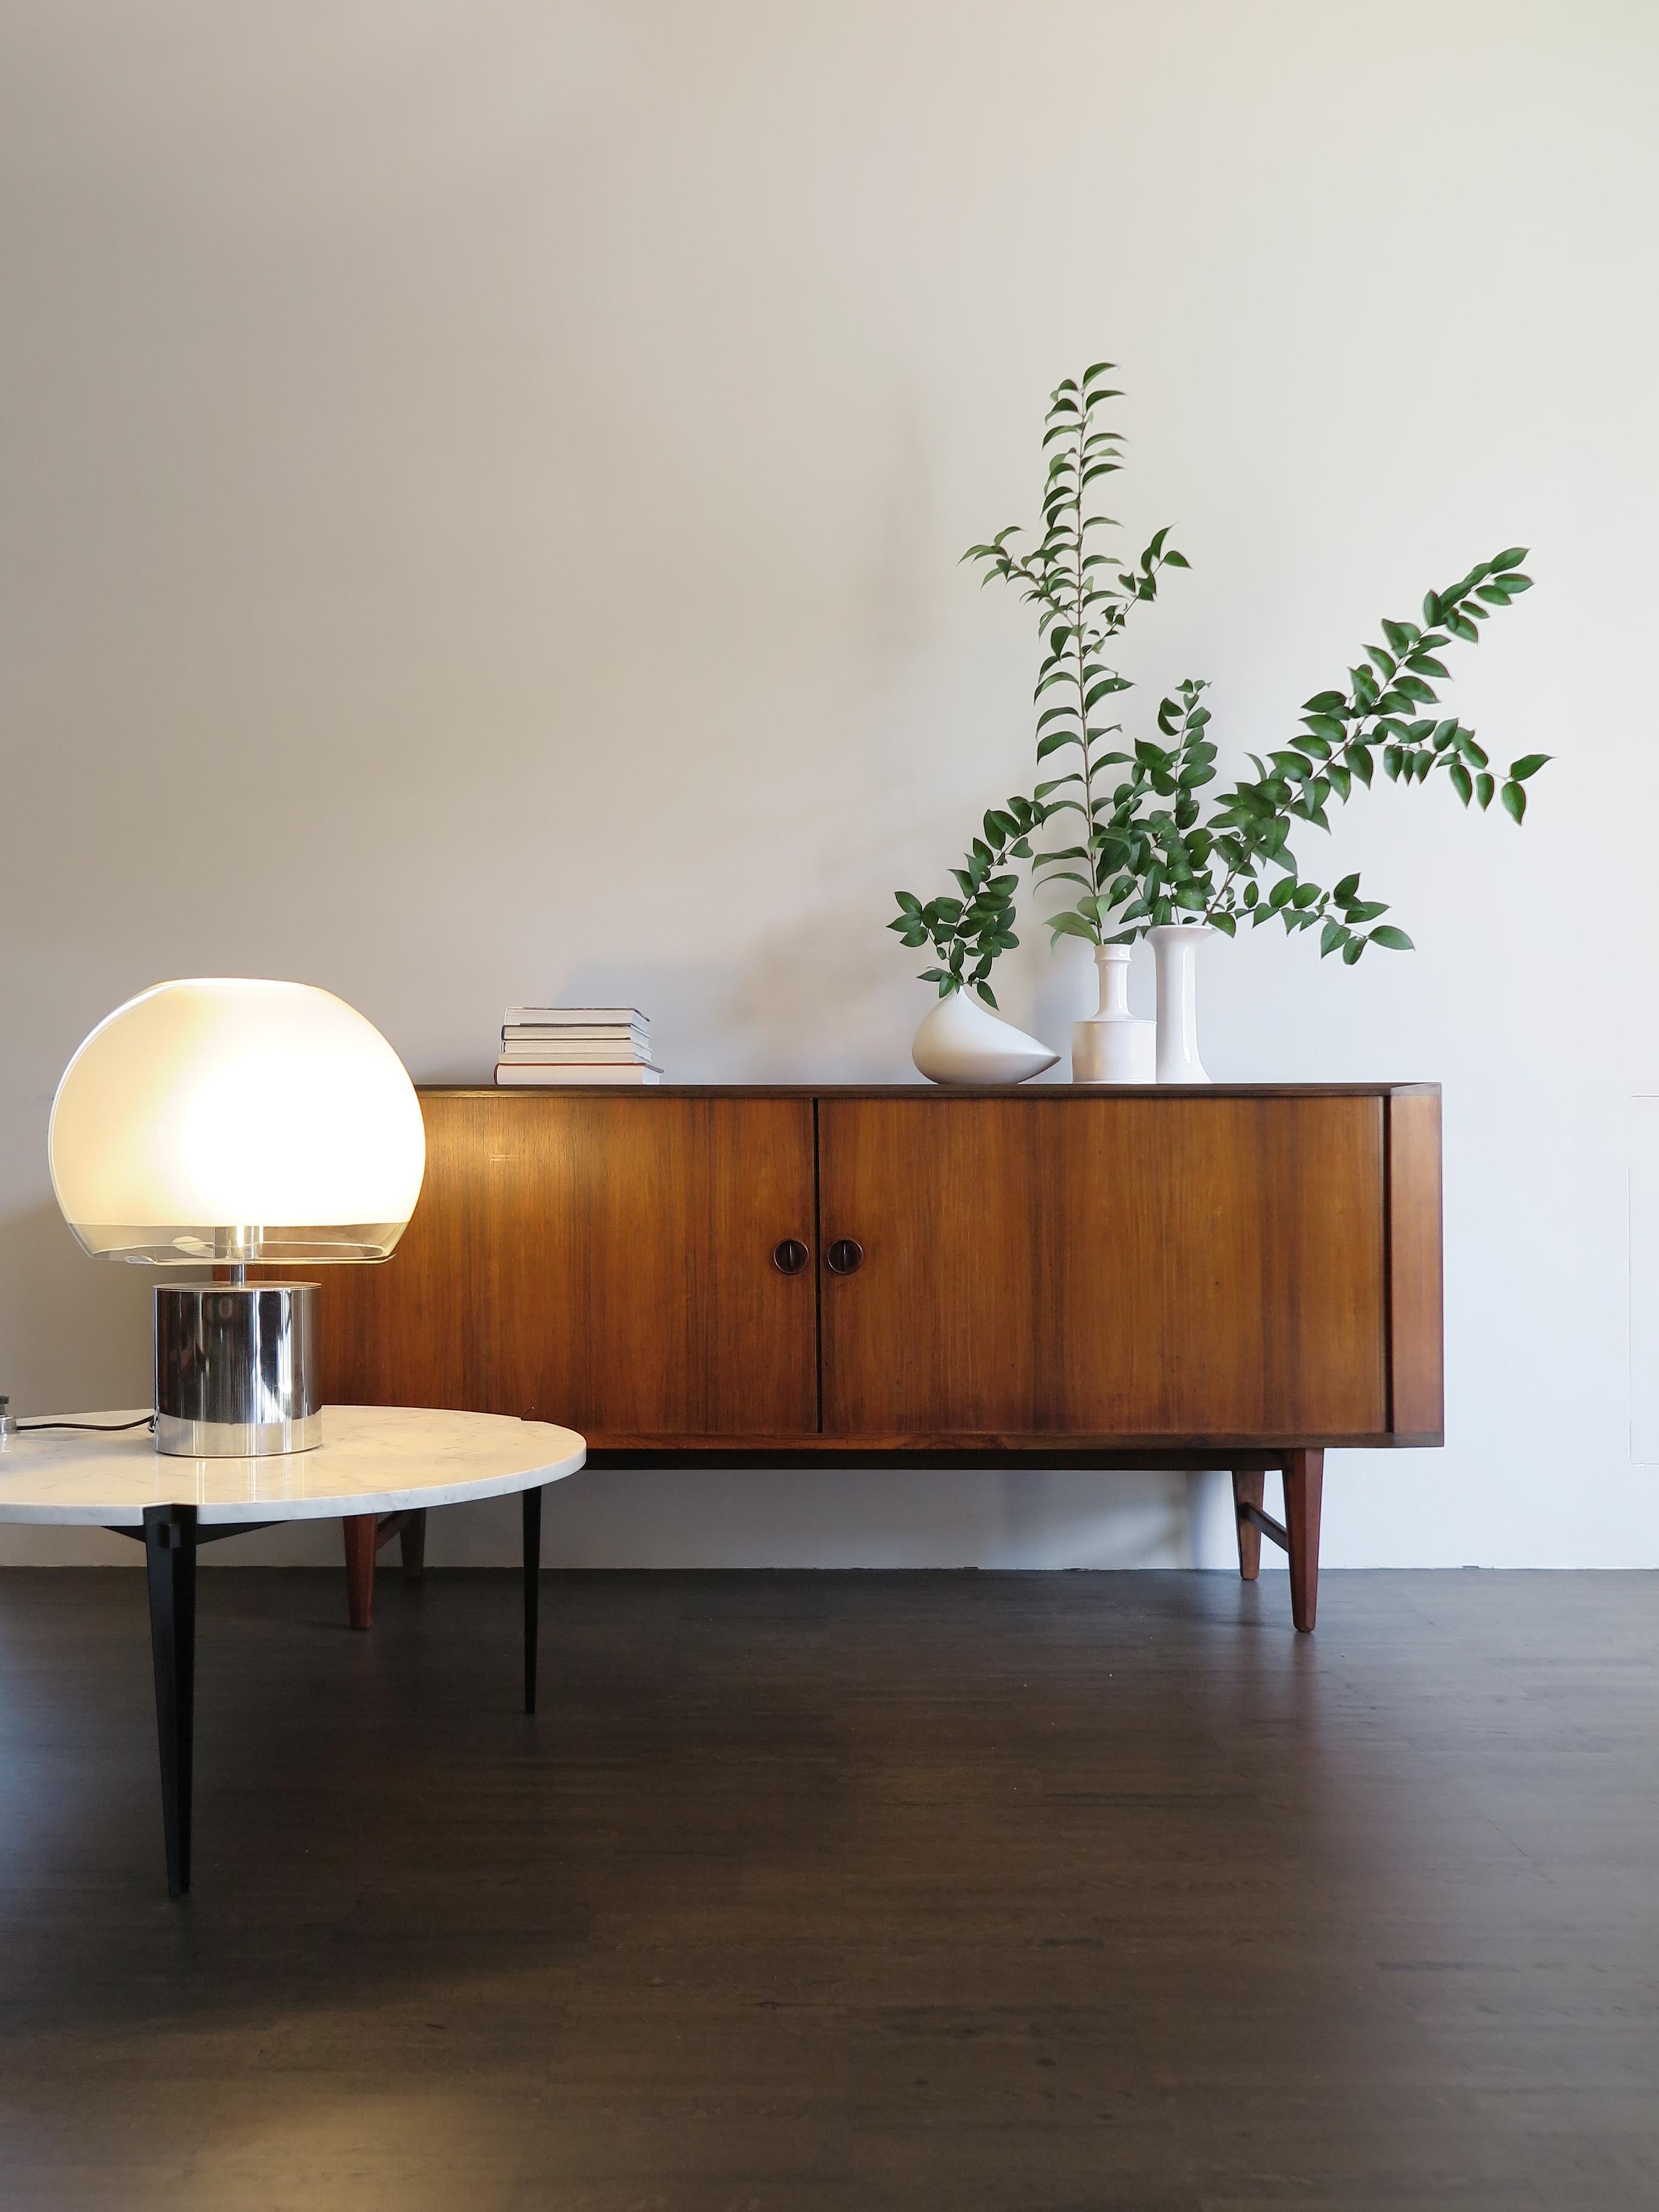 Midcentury modern design scandinavian dark wood sideboard with two sliding doors and internal drawers, manufactured in Denmark from 1950s.
Please note that the sideboard is original of the period and this shows normal signs of age and use.